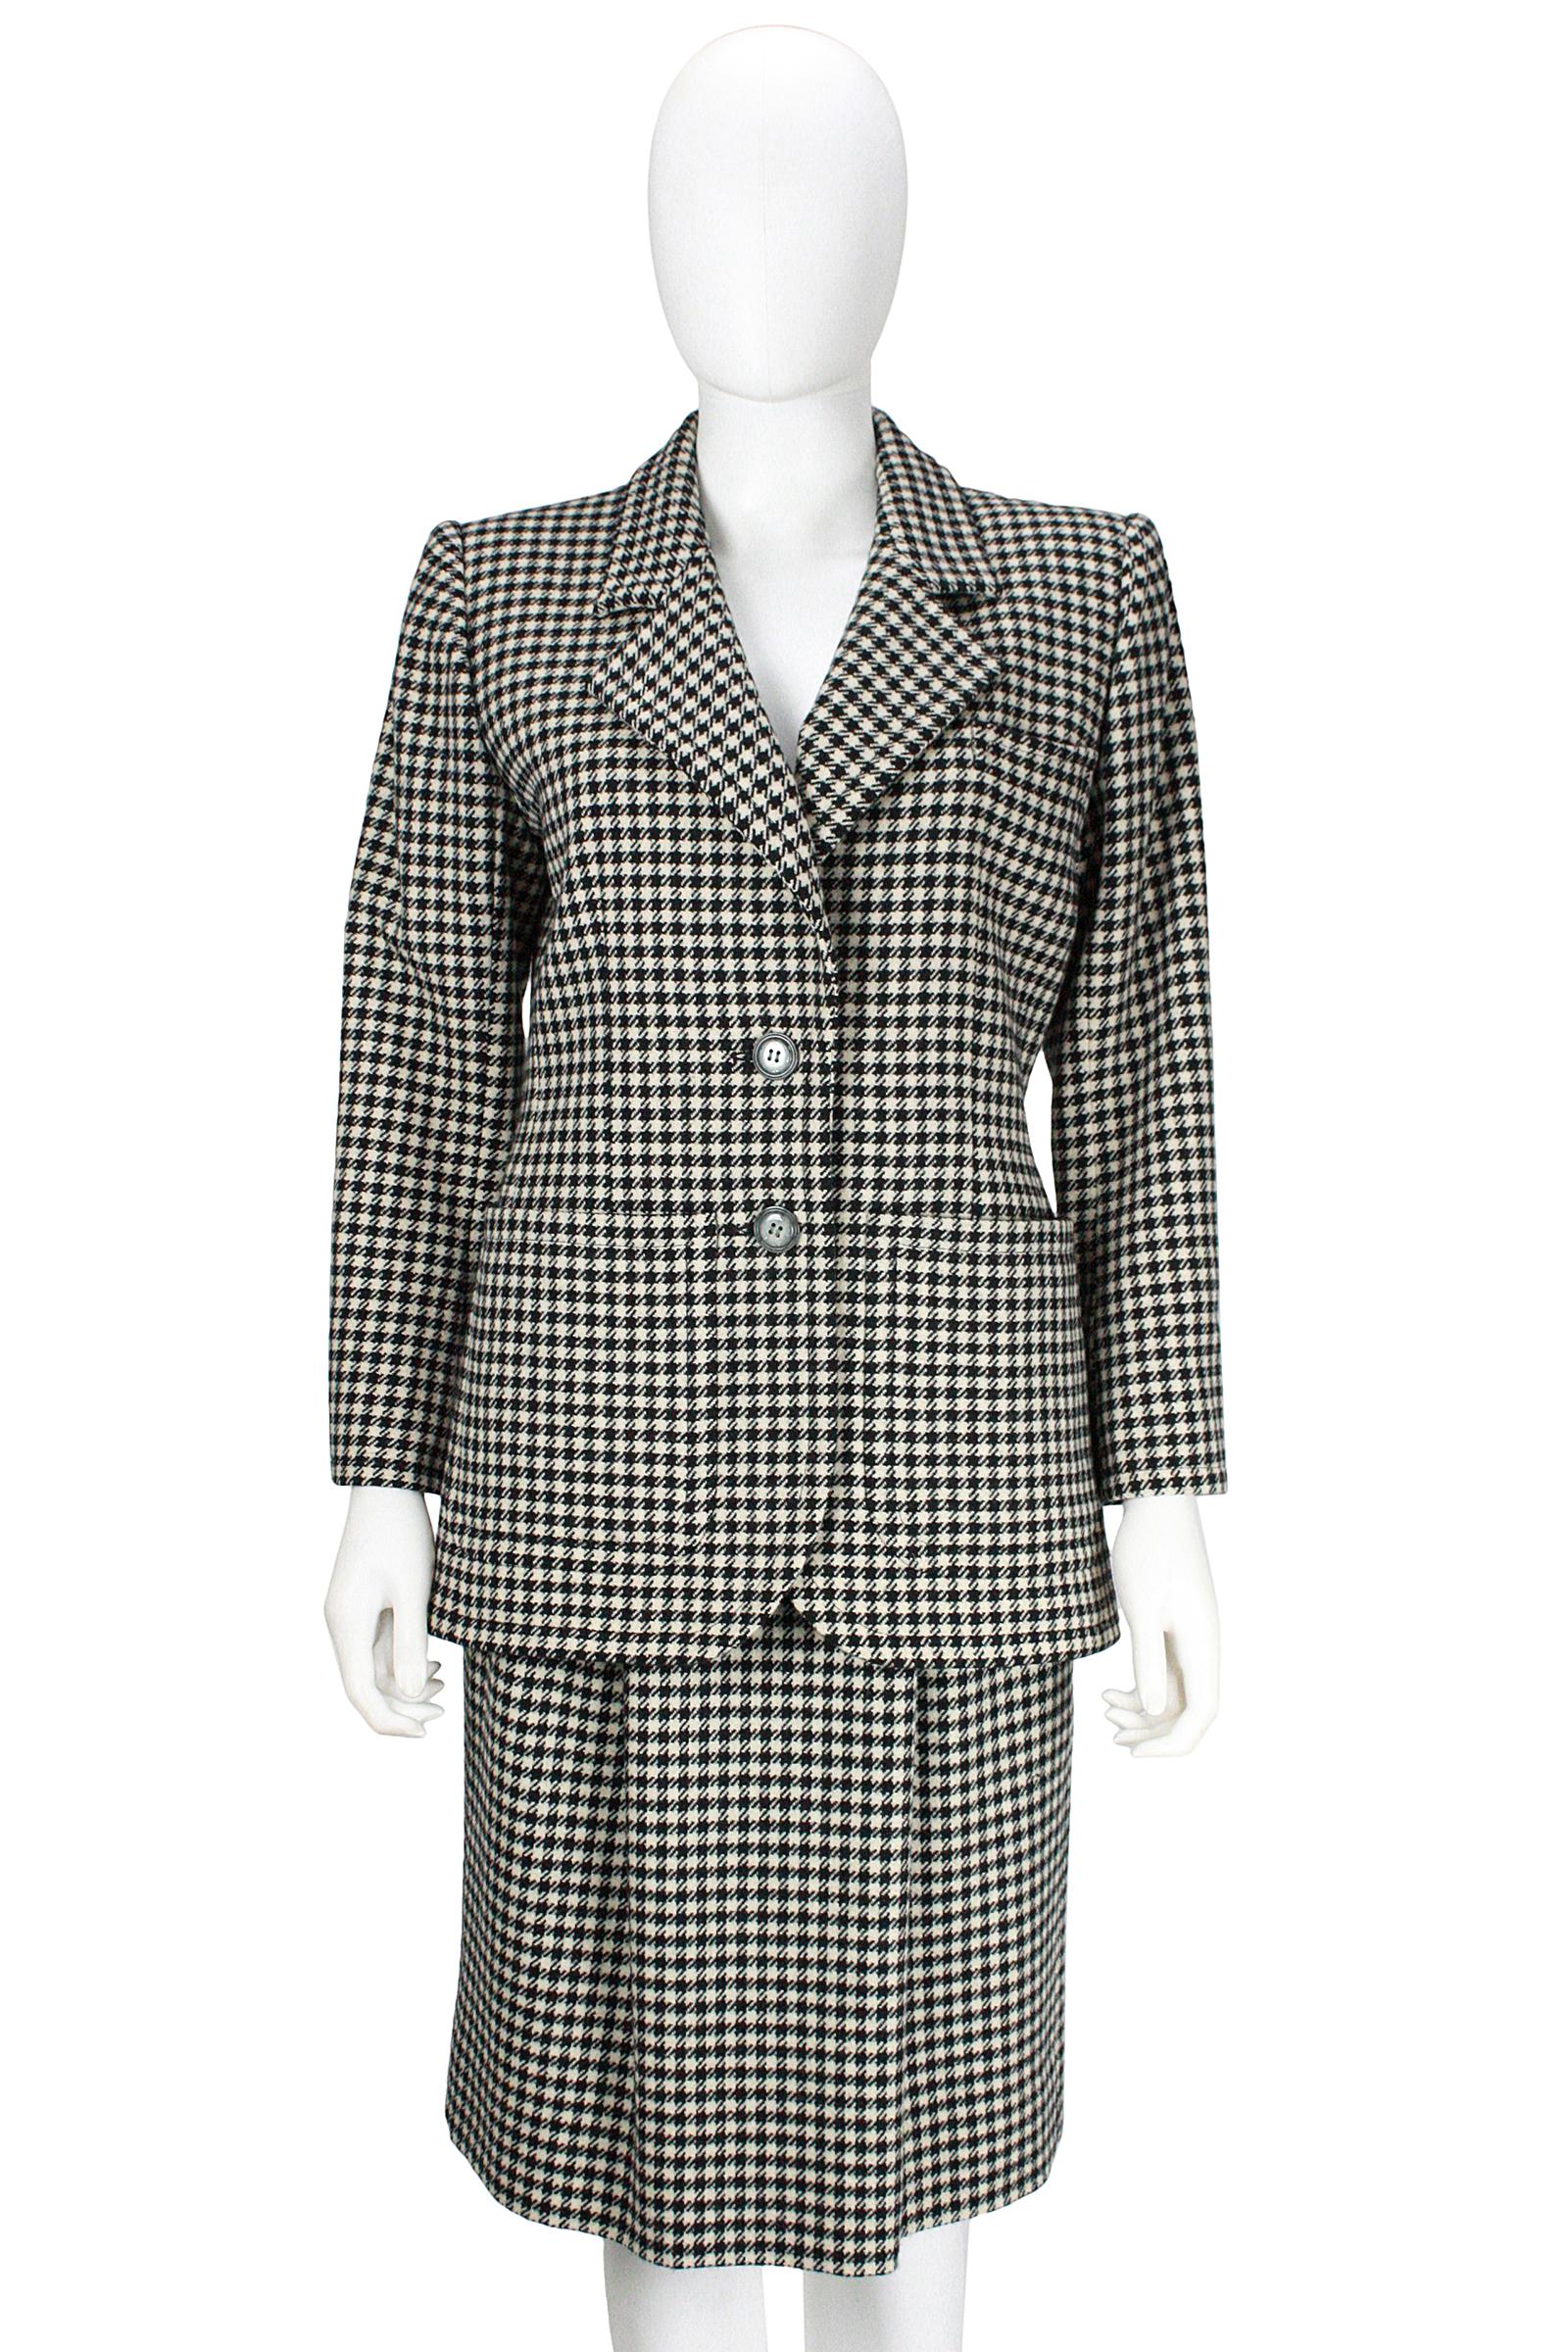 Saint Laurent Rive Gauche 
Wool houndstooth skirt and jacket 
Black and white  
Made in France 
Two lined side pockets 
Two grey buttons 
Black silk lining 
Skirt back vent 
Two skirt side pockets 
Side zipper and hook closure 